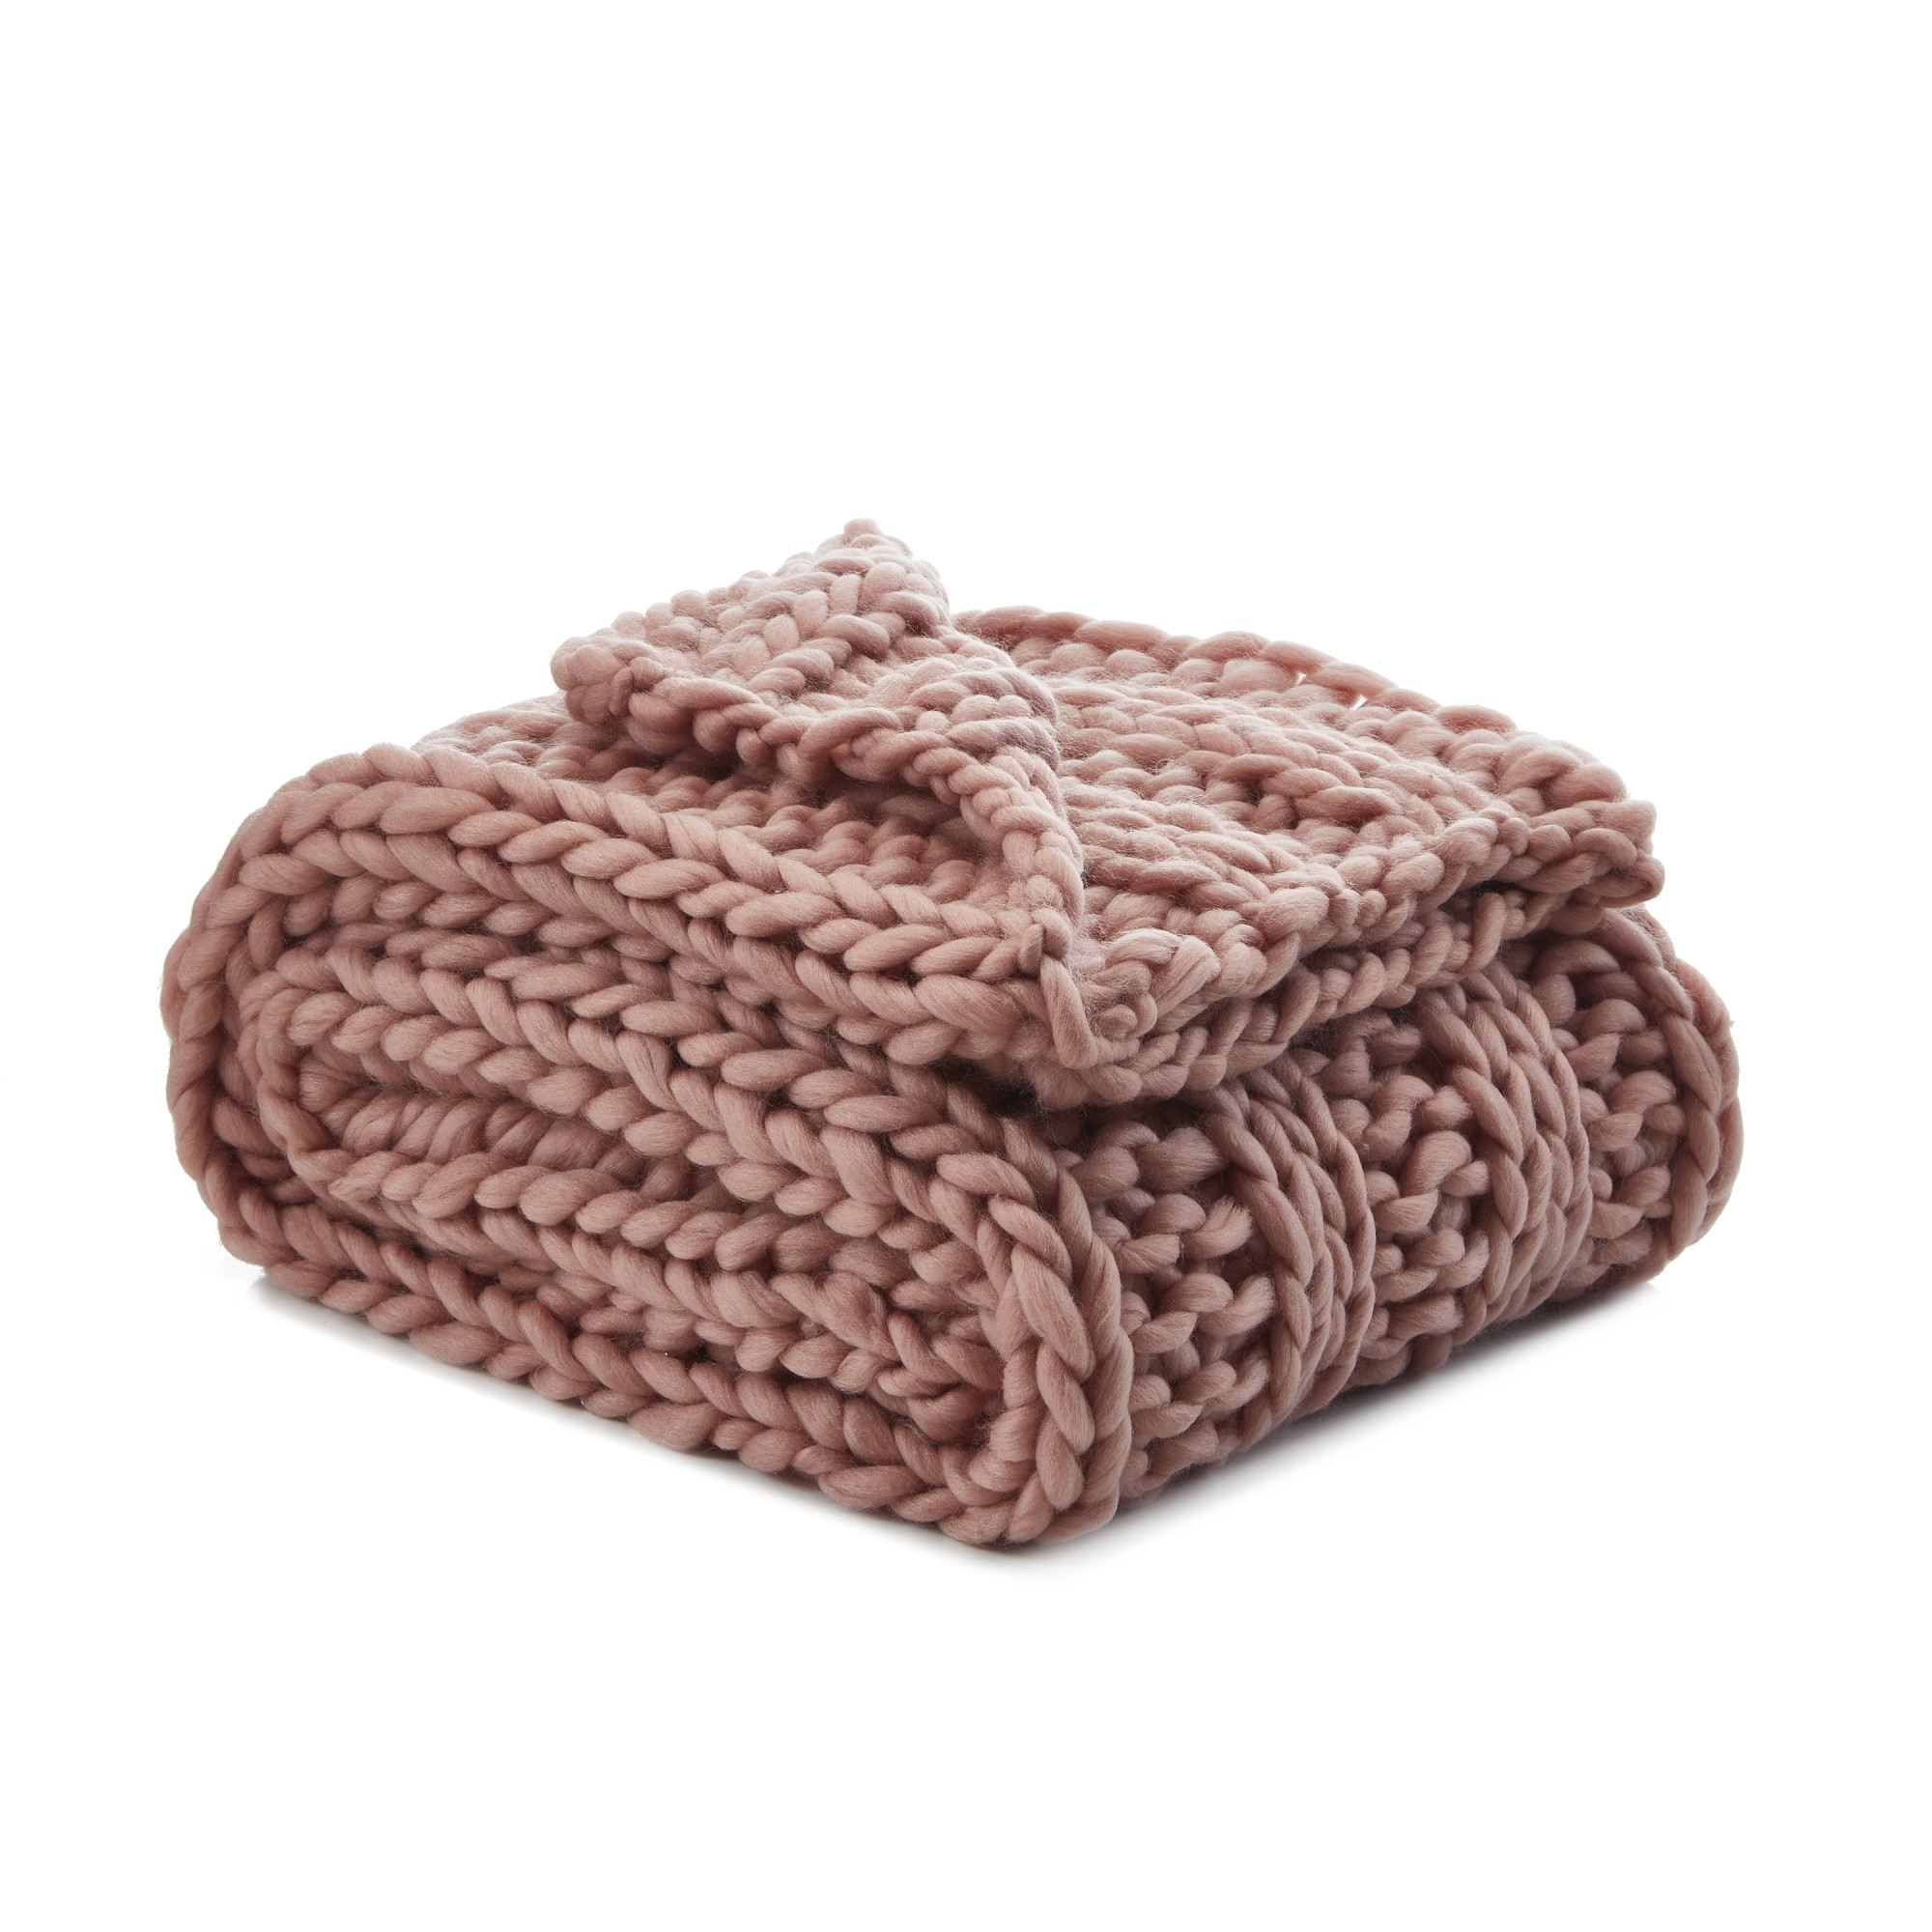 Blush Knitted Polyester Solid Color Throw Blanket-531266-1